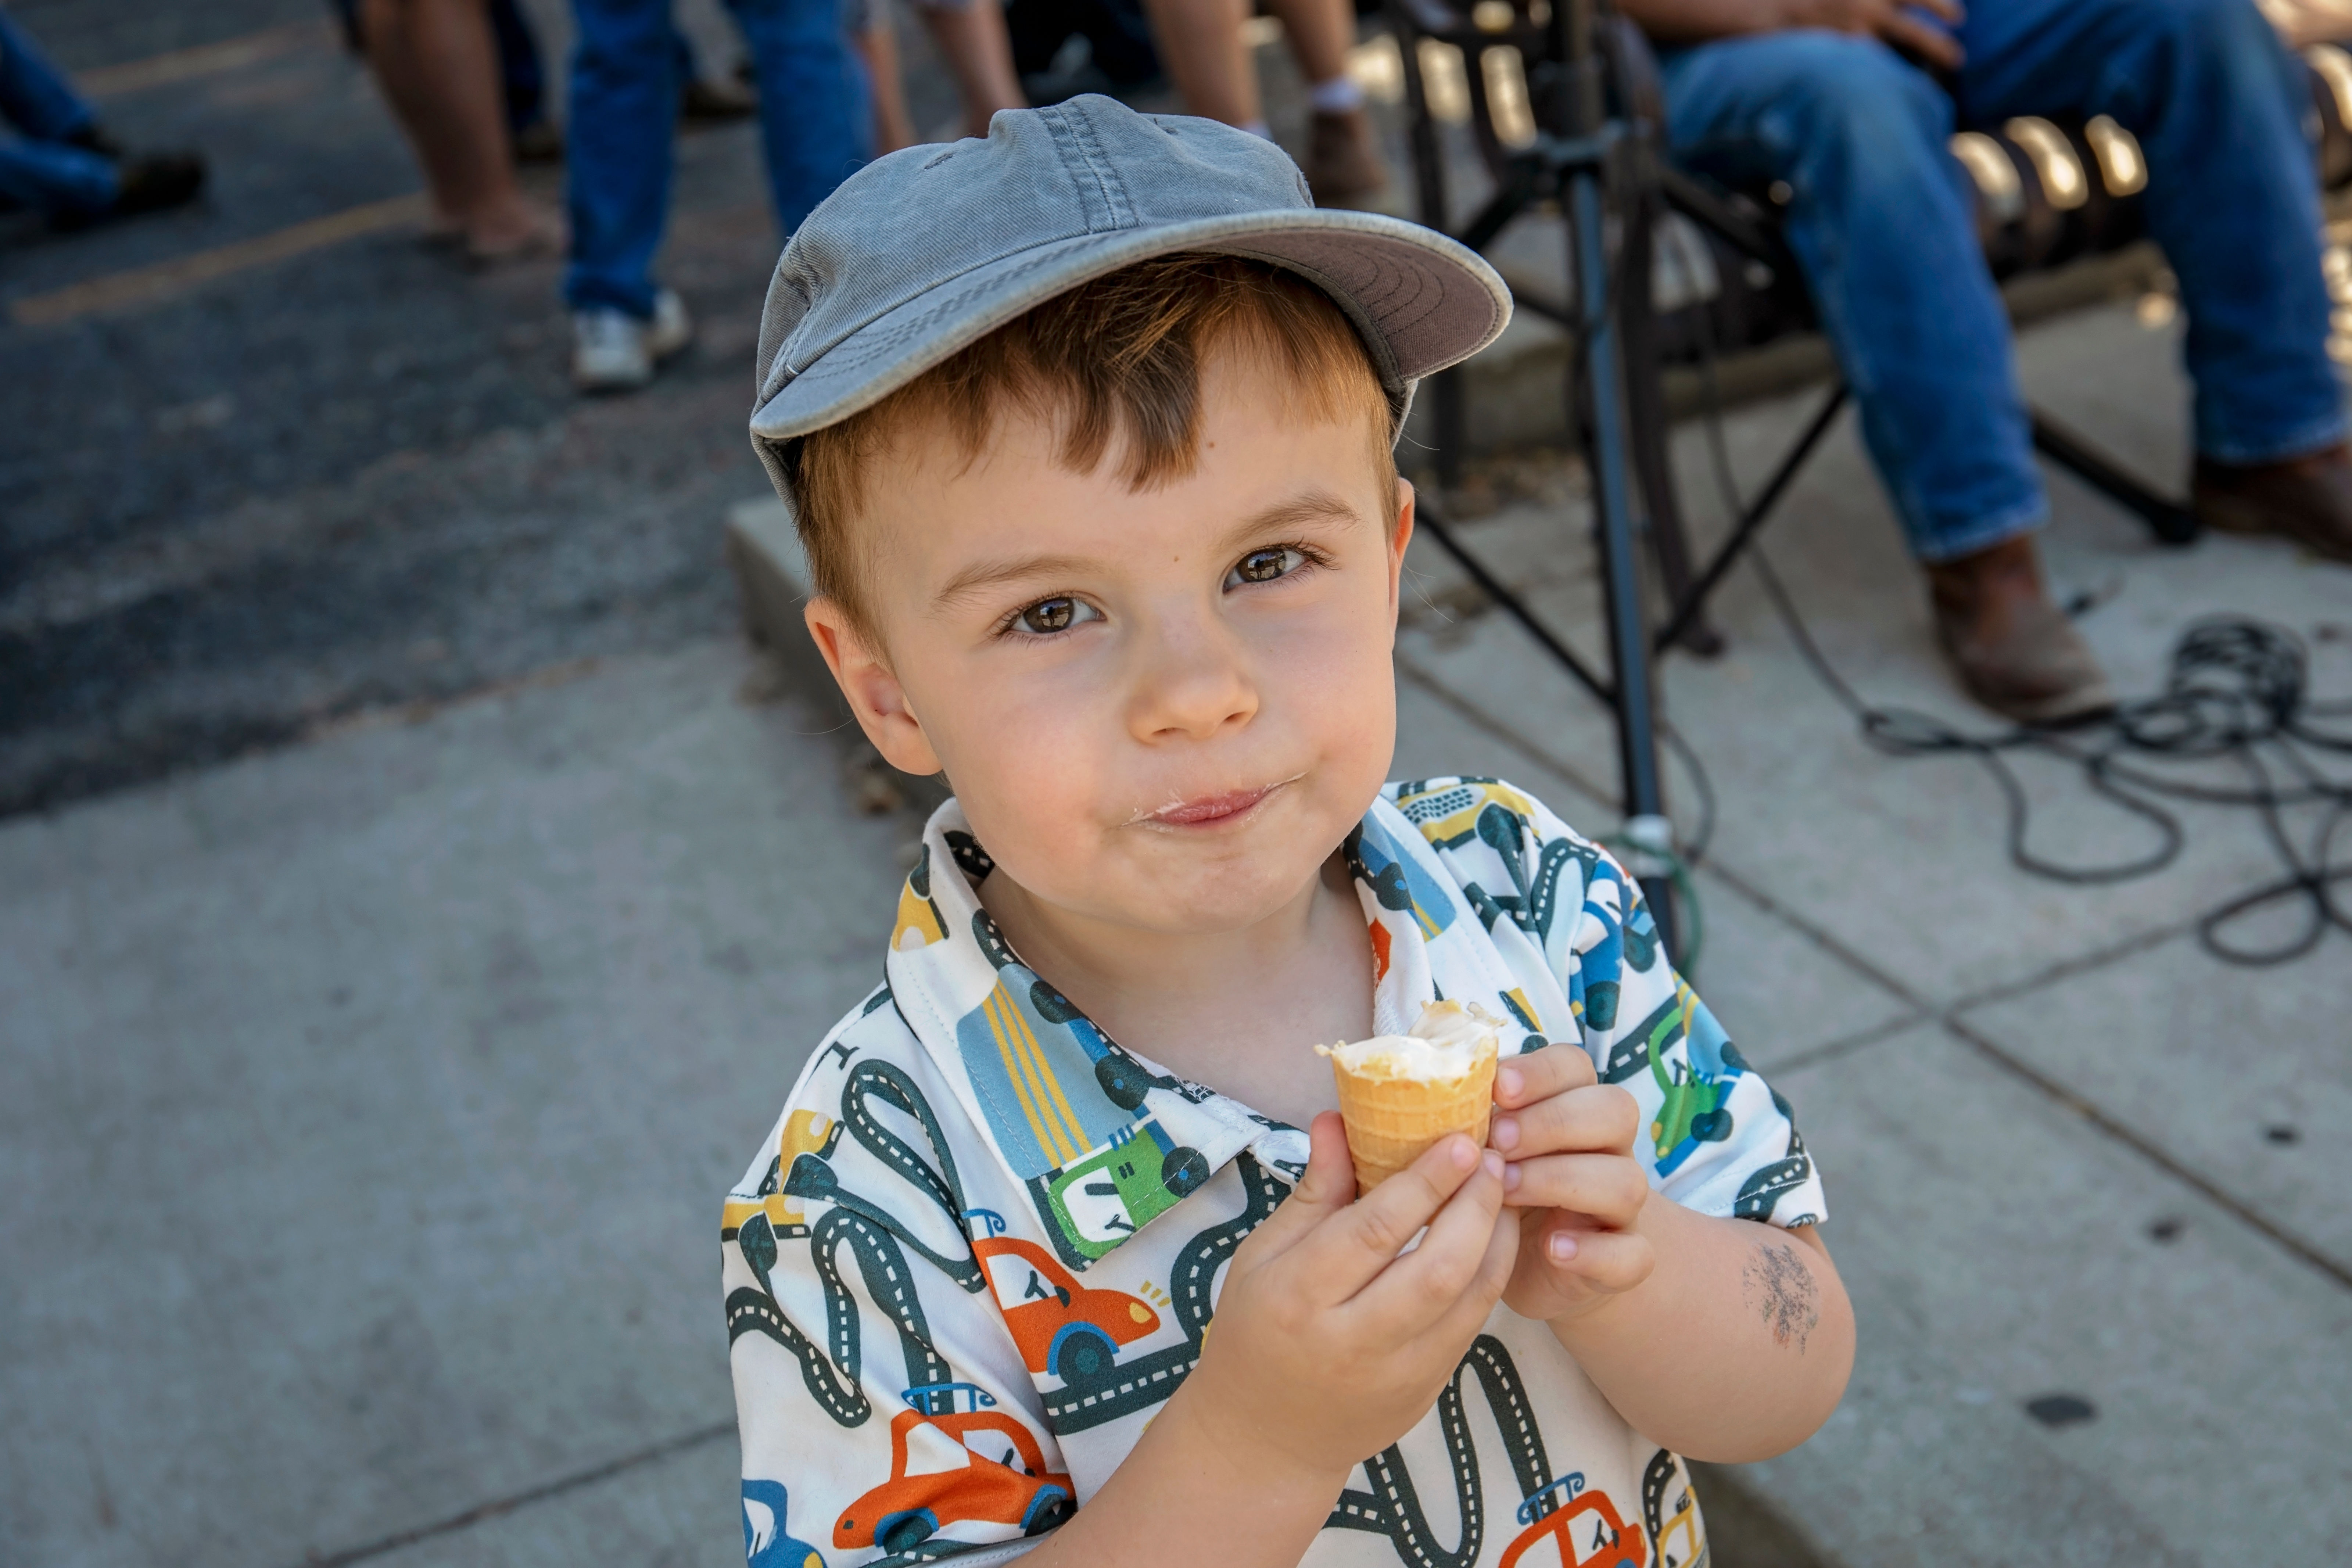 Maverick, age 3, enjoys his free ice cream cone from Dutch Country General Store.